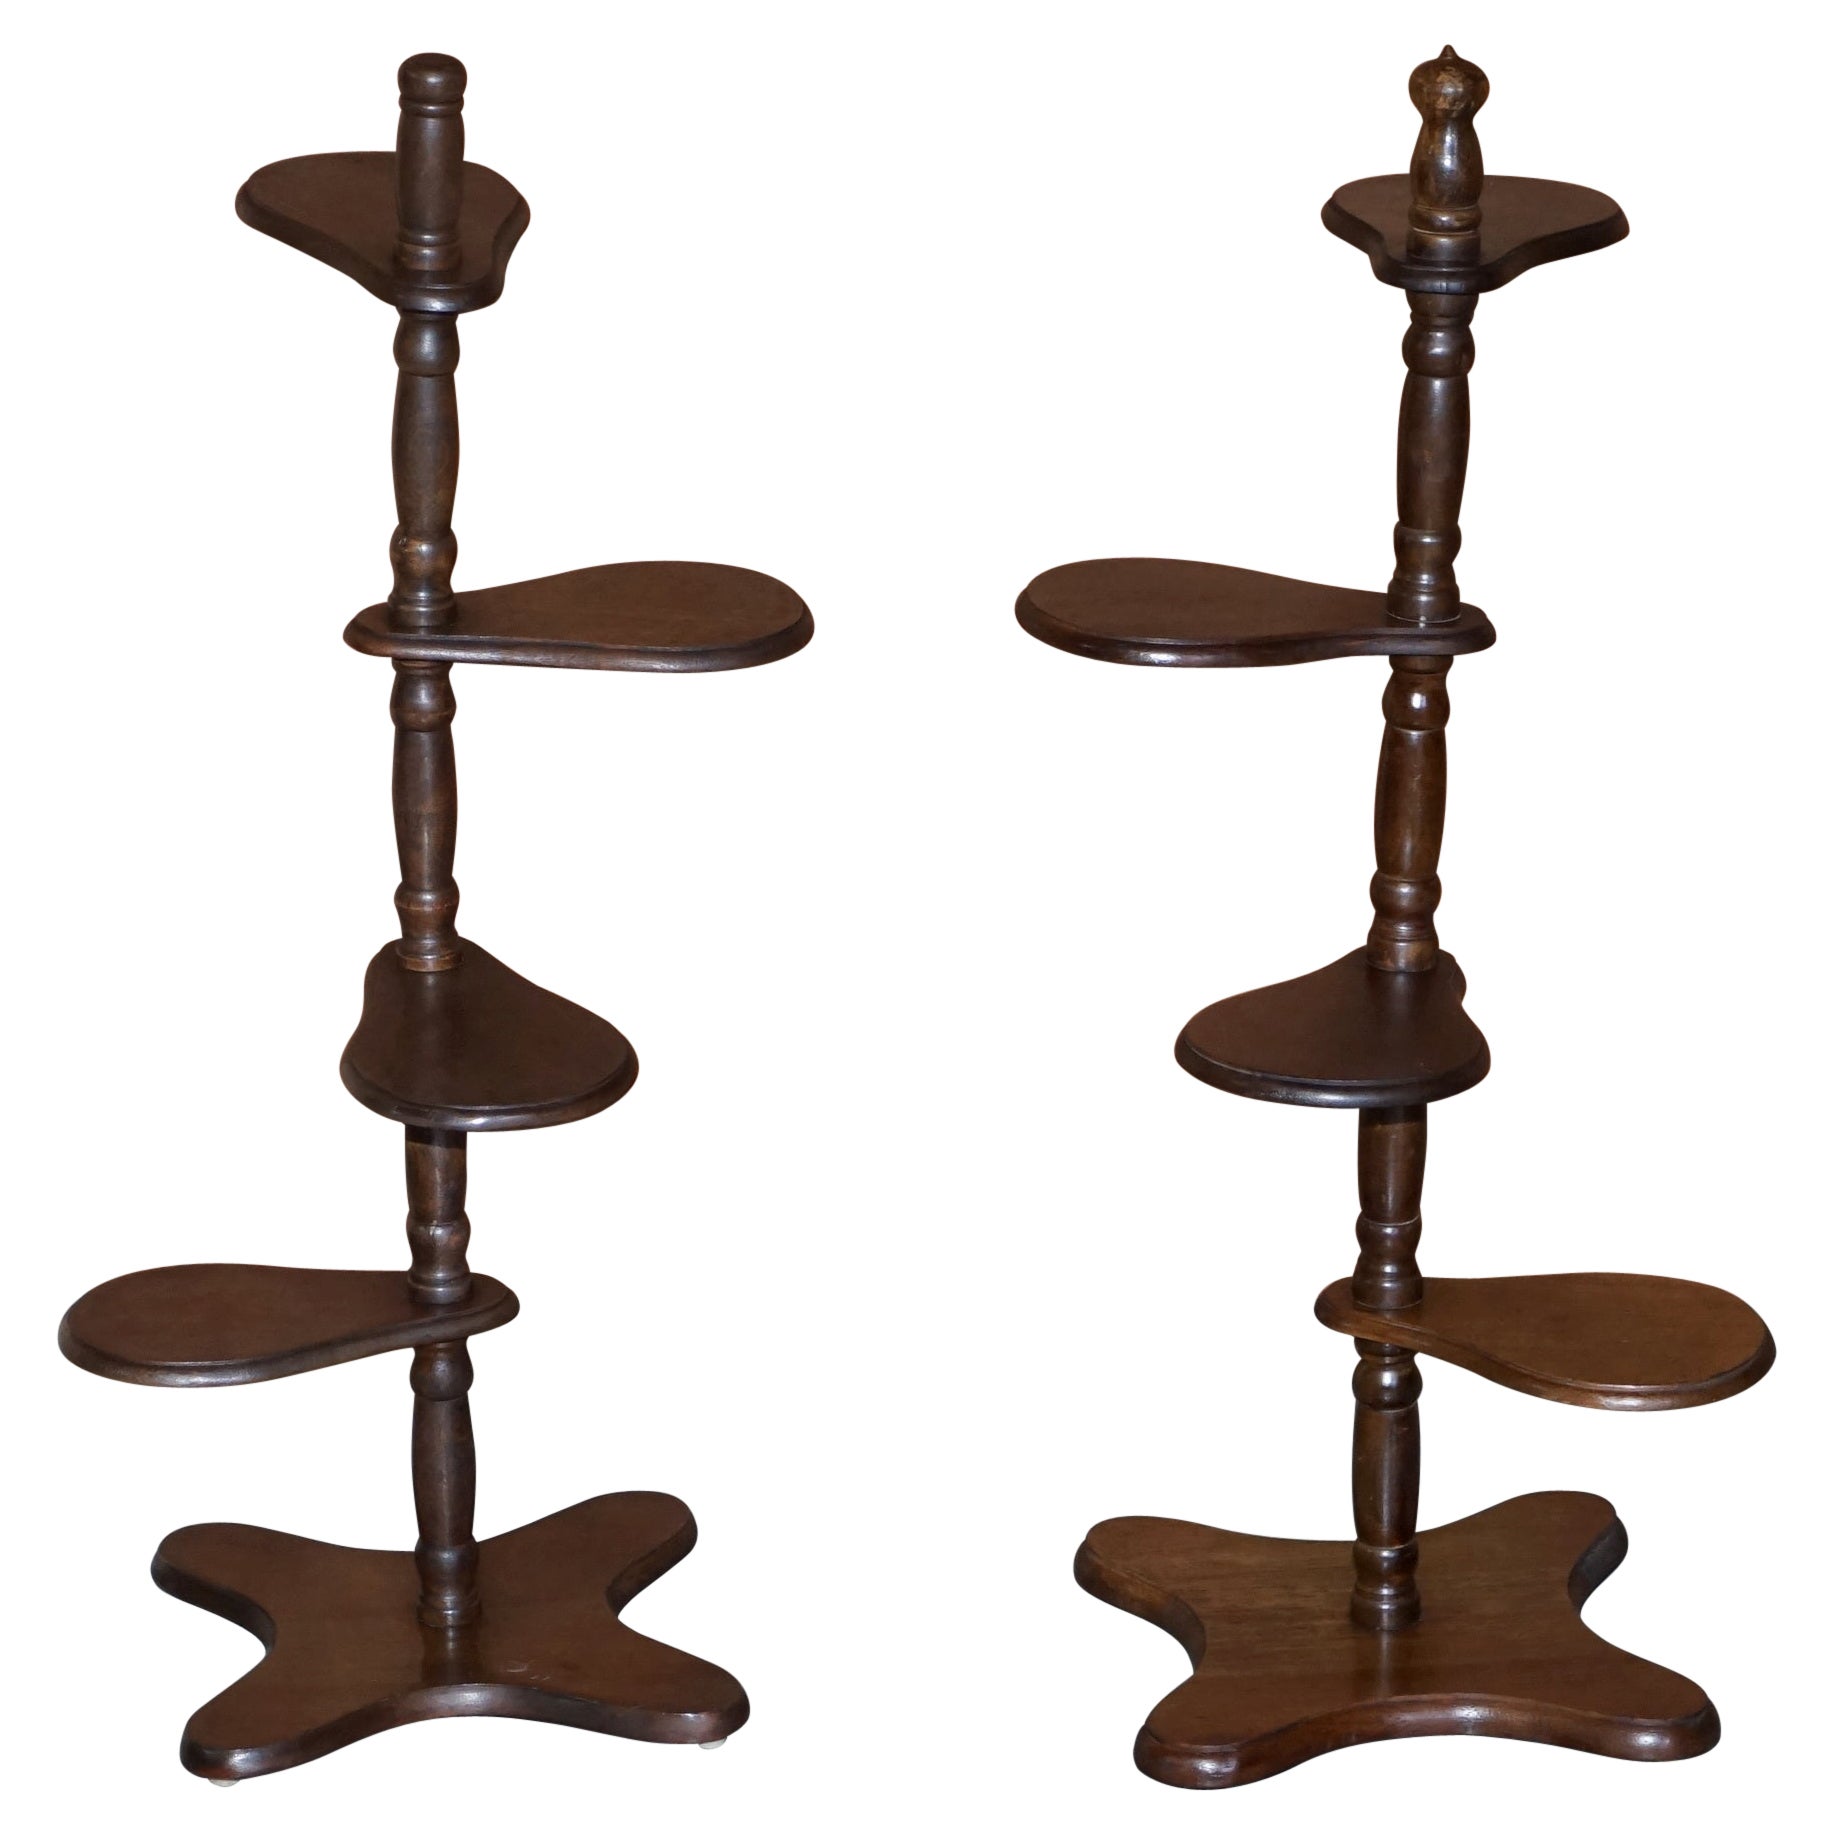 Pair of Hardwood Whatnot Adjustable Side End Tables Cake Stands Display Stands